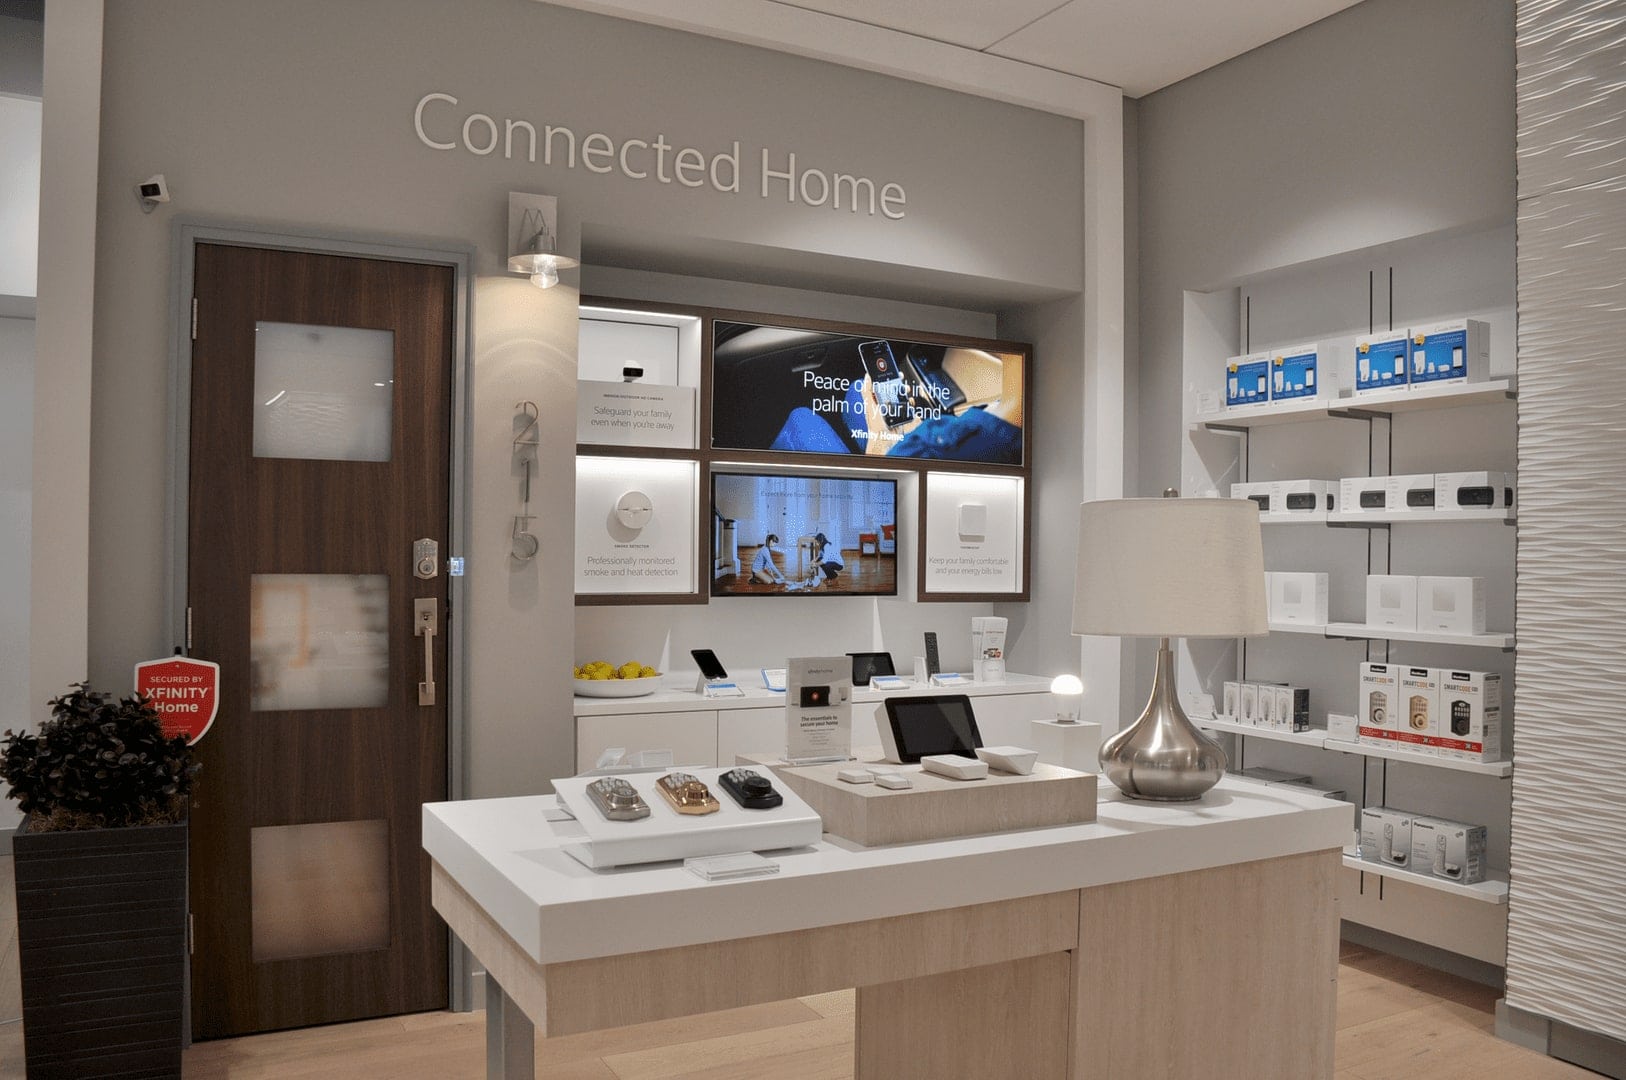 The inside of an Xfinity Comcast store which has connected home devices on display